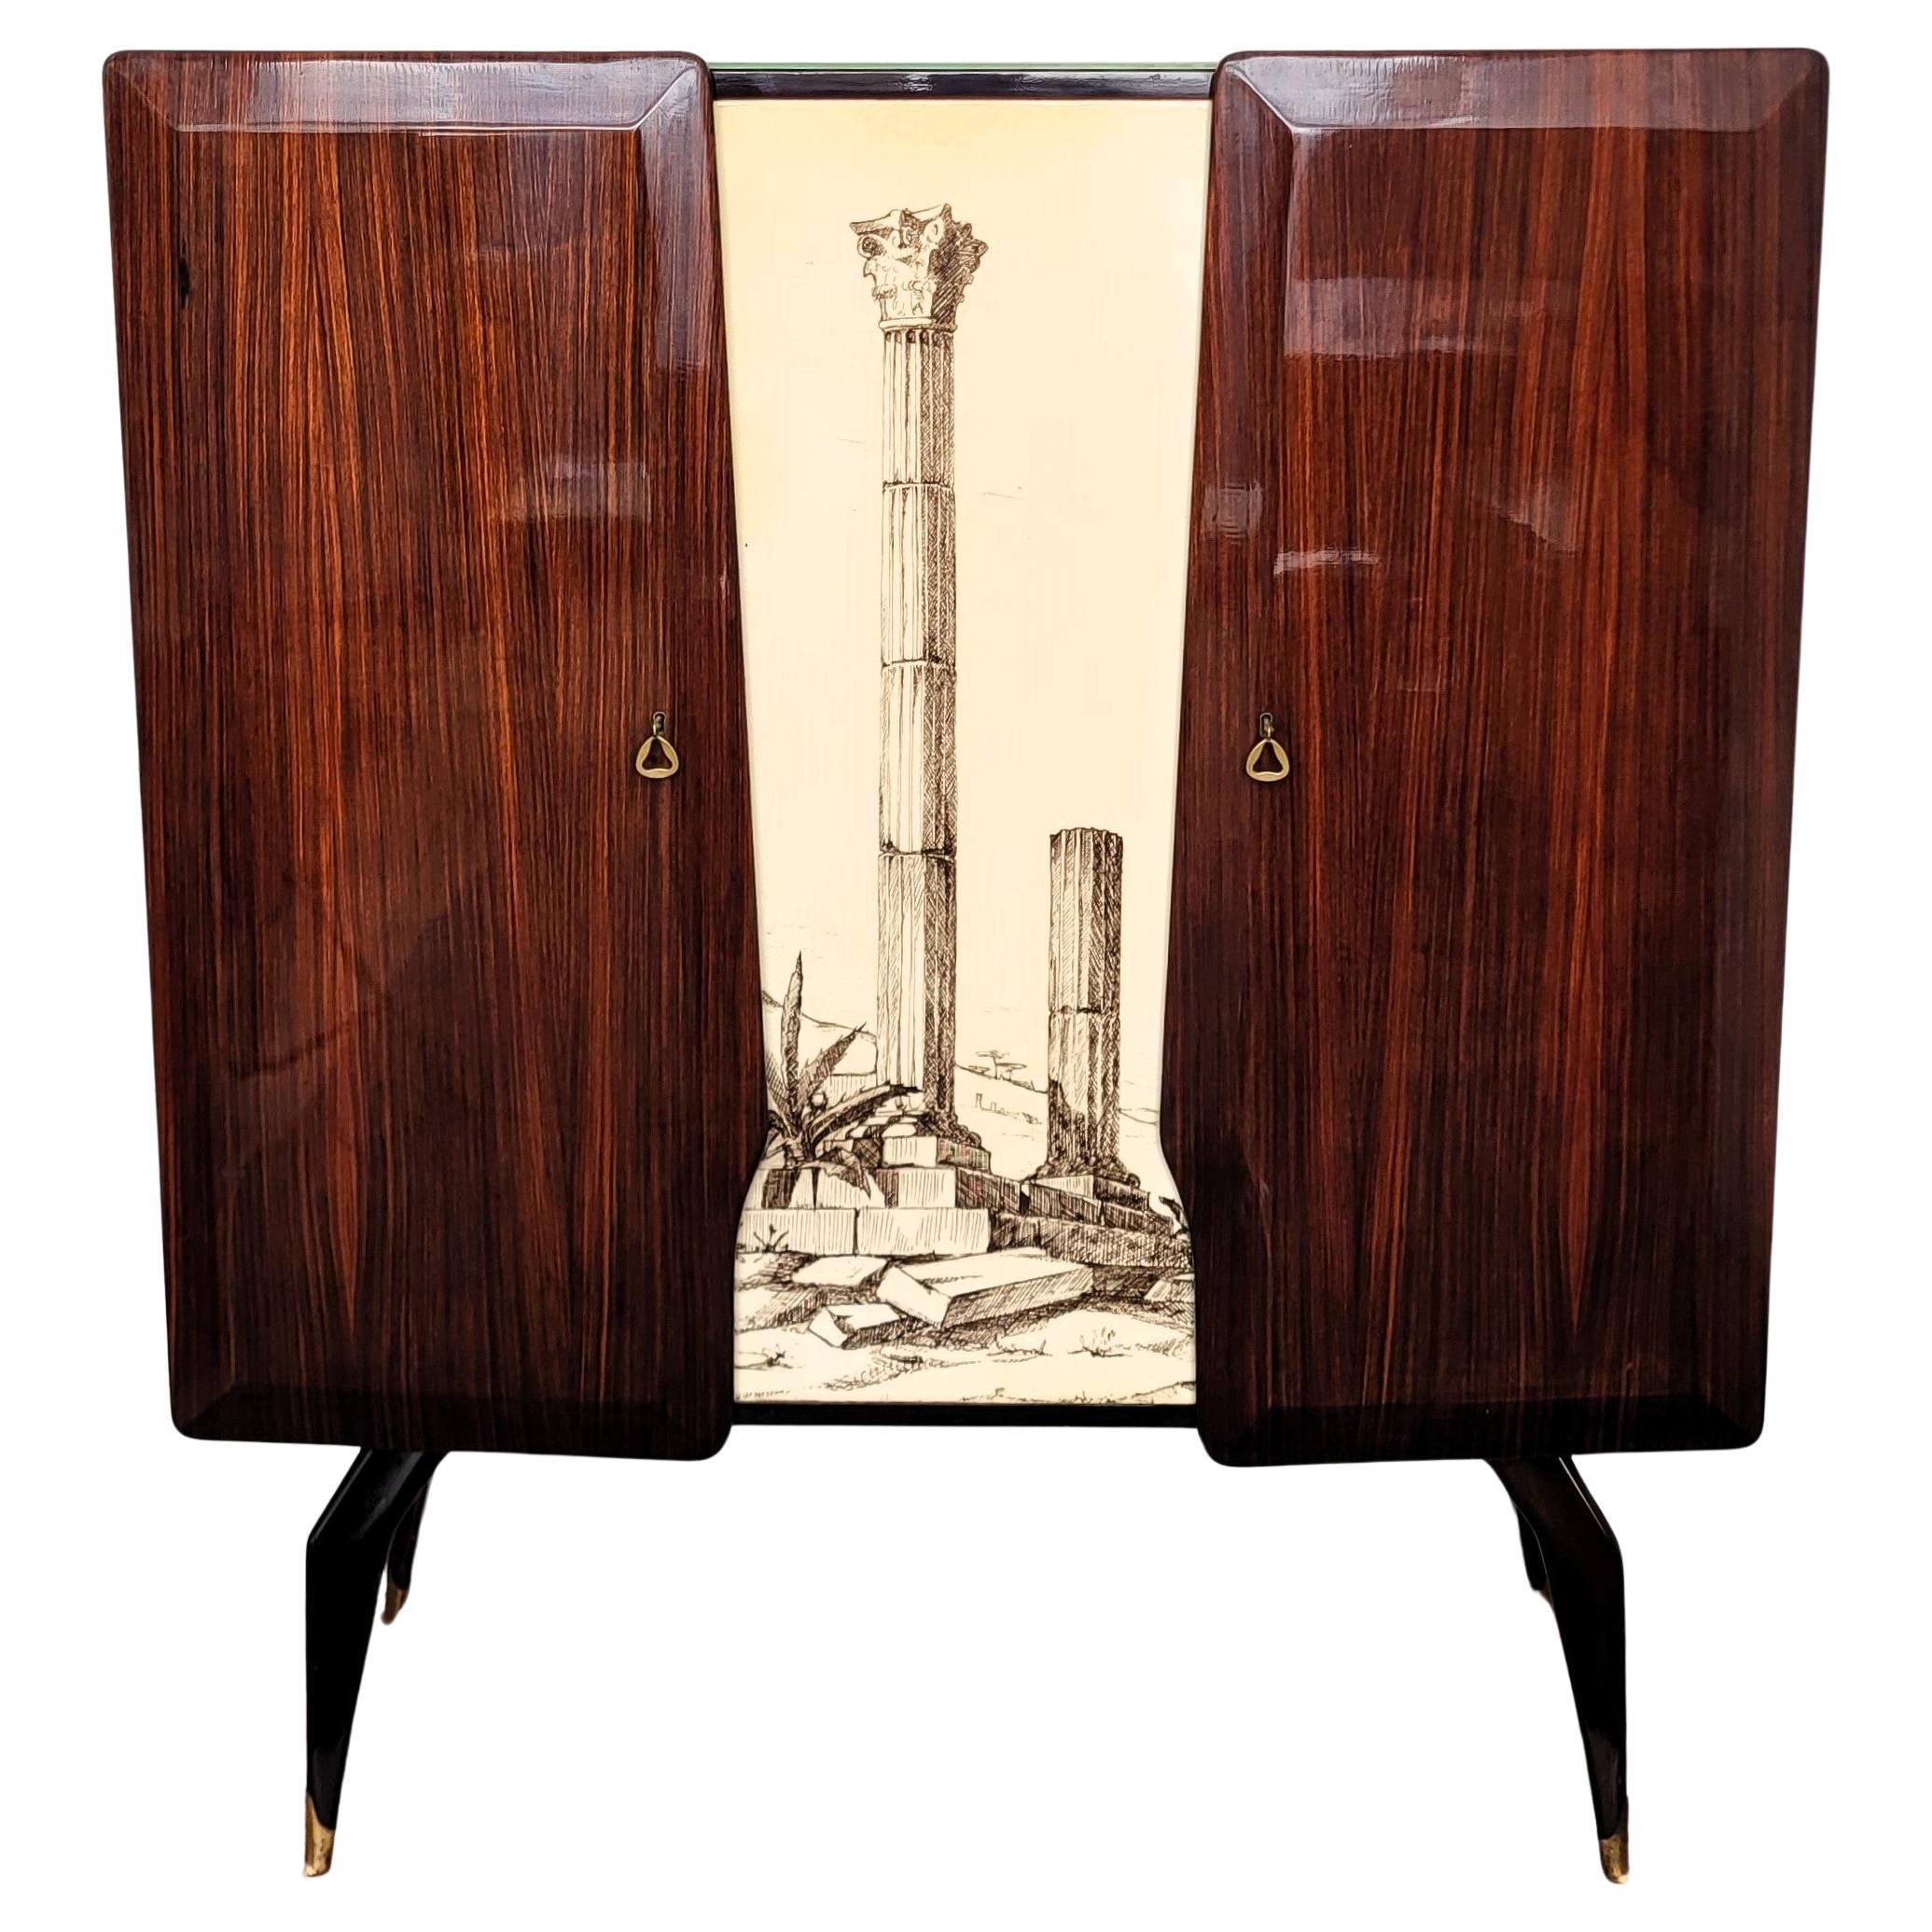 1960s Art Deco Midcentury Italian Tall Wood Brass Decorated Dry Bar Cabinet For Sale